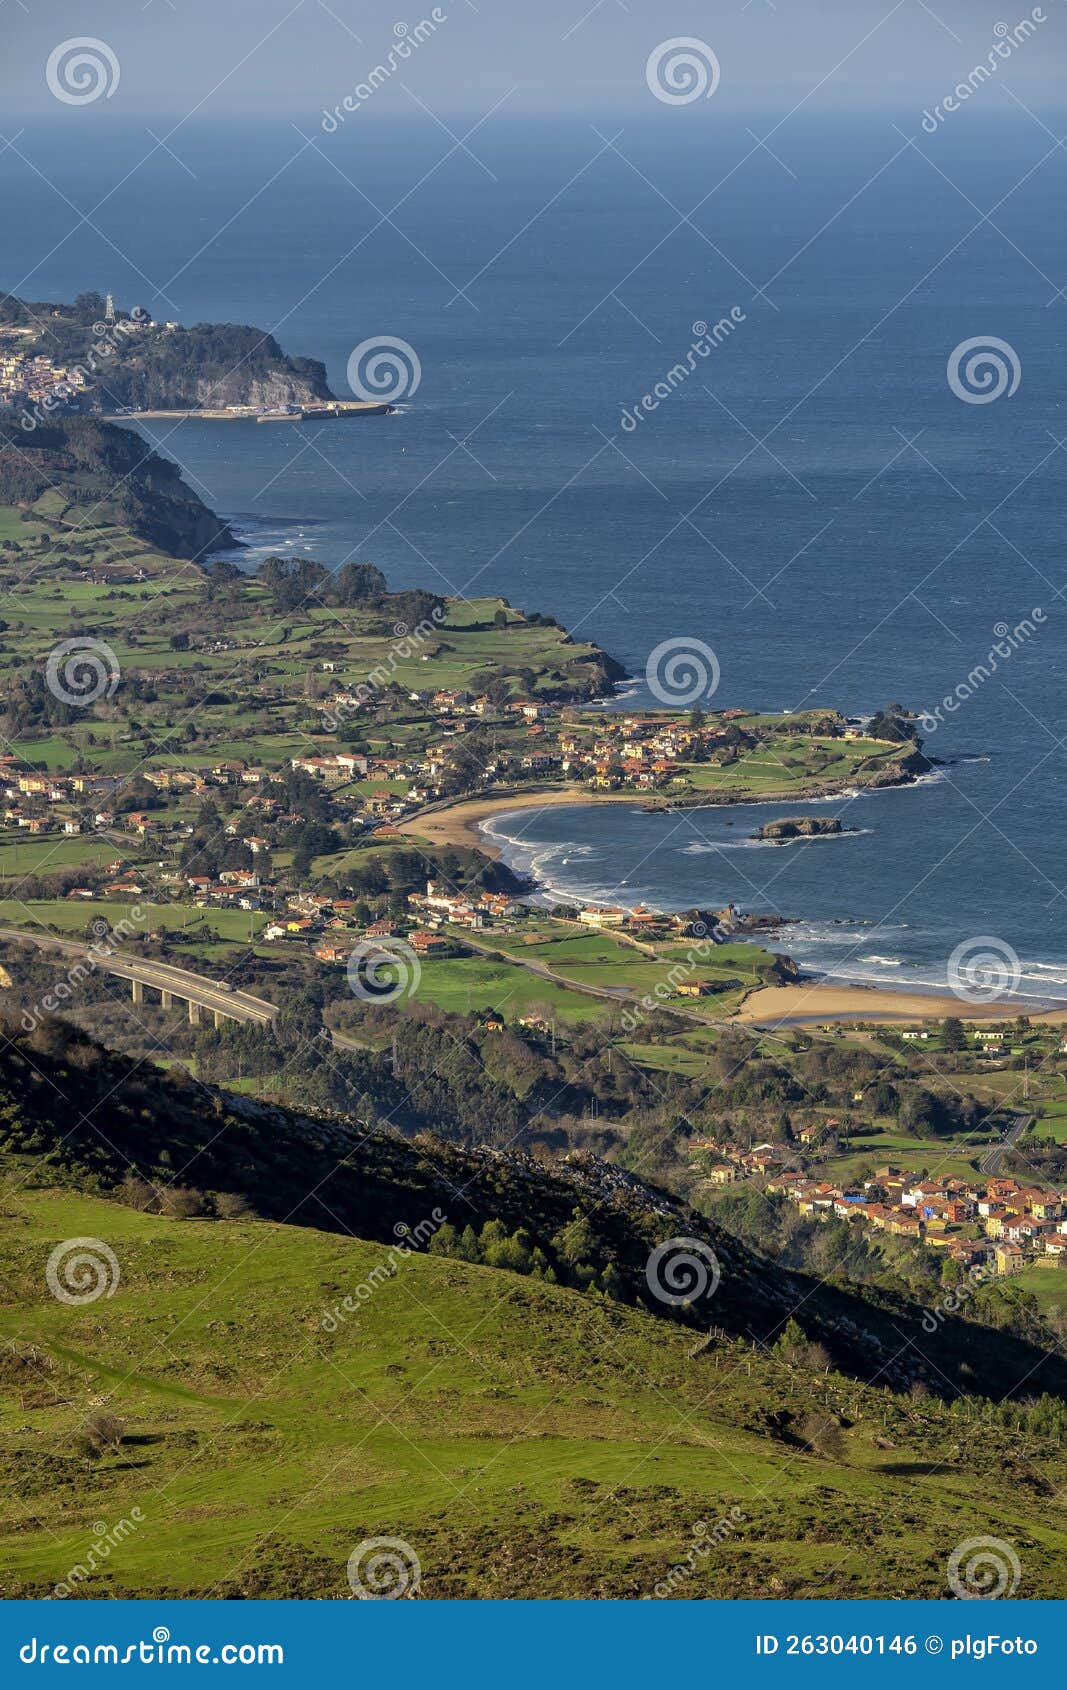 general view of the town la isla in spain